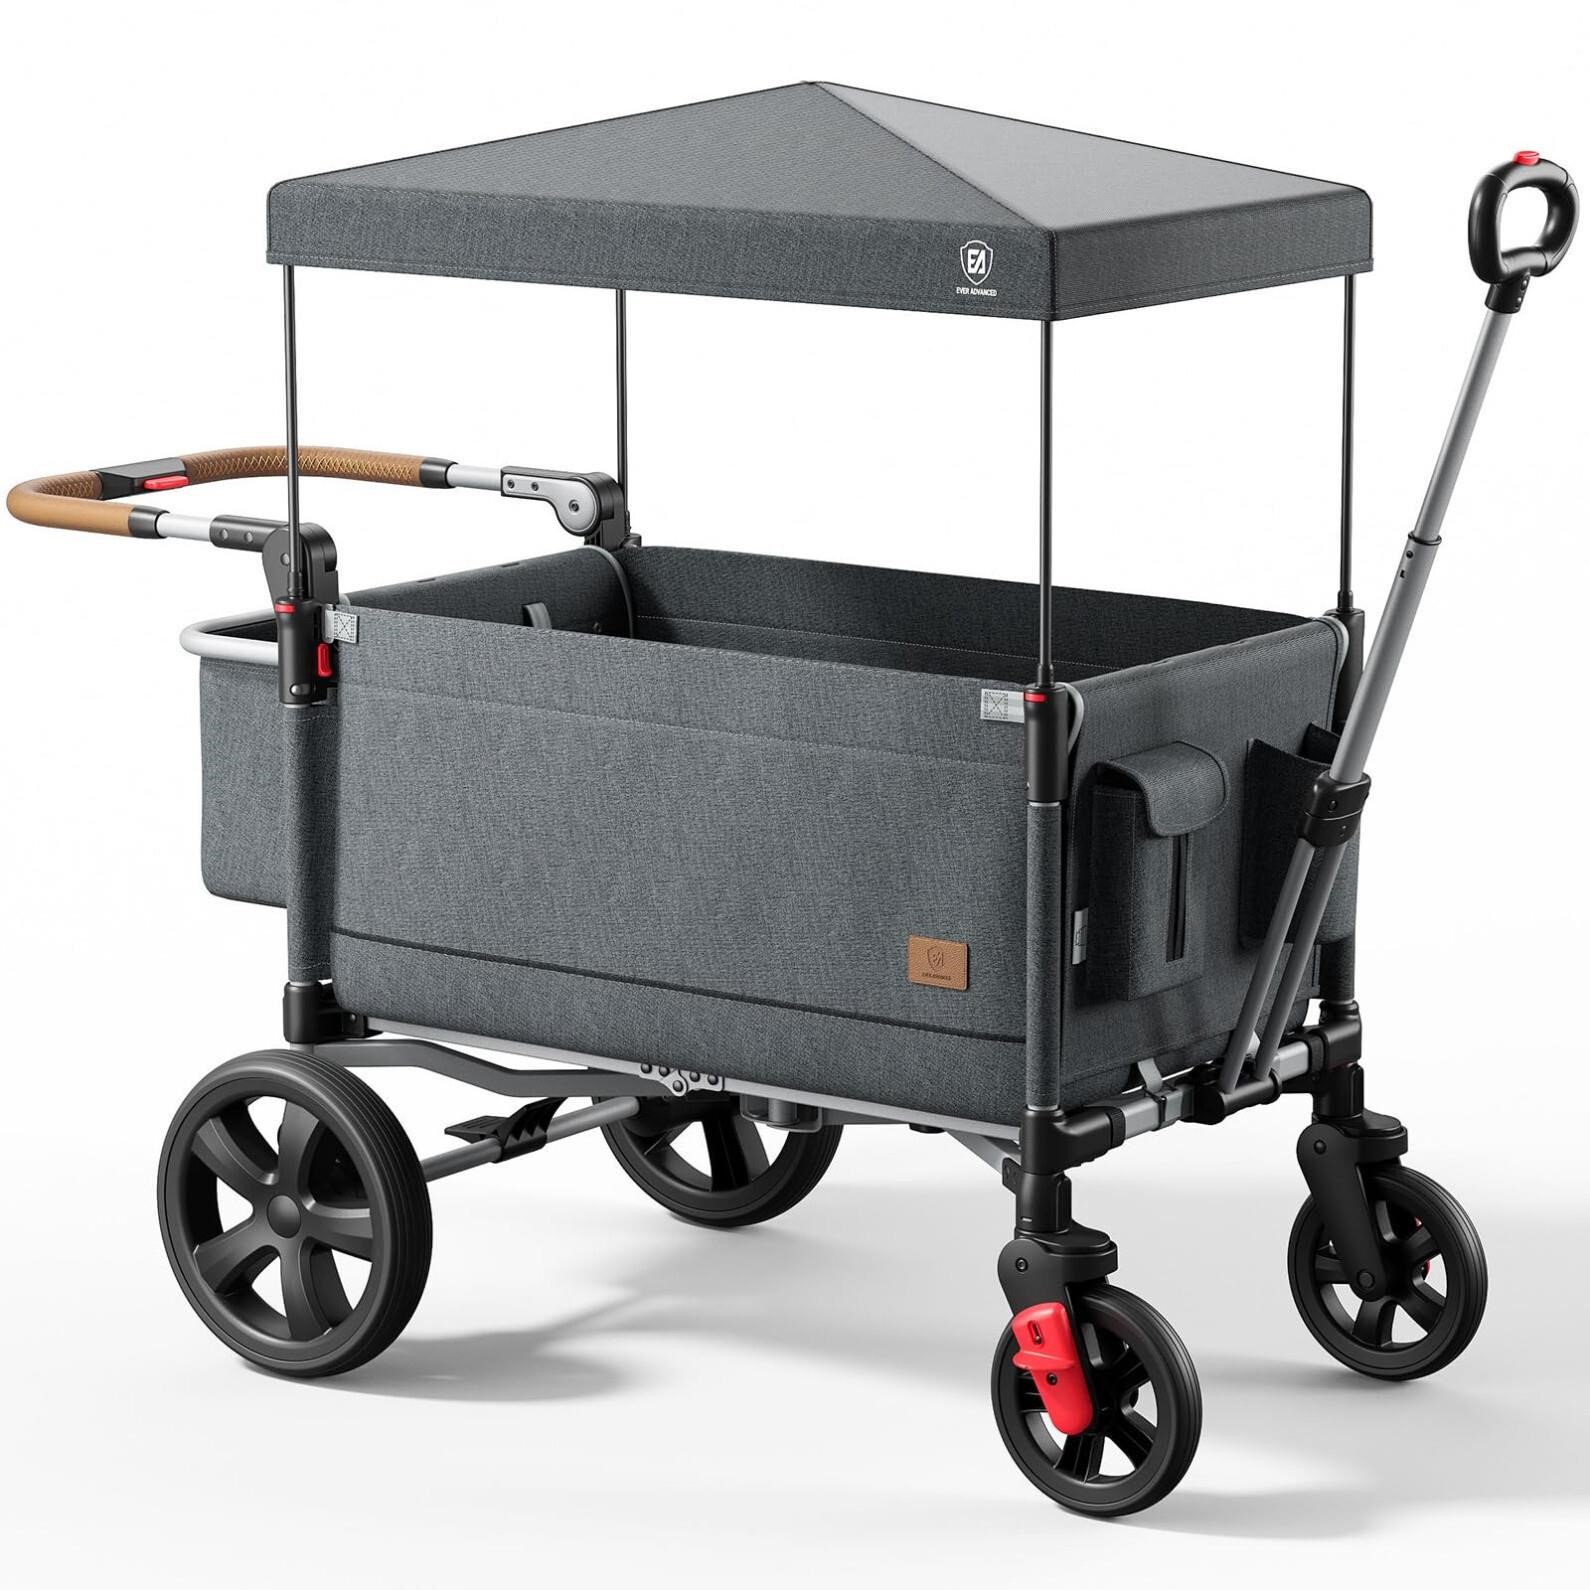 EVER ADVANCED Side-unzip Wagon Stroller for 2 Kid